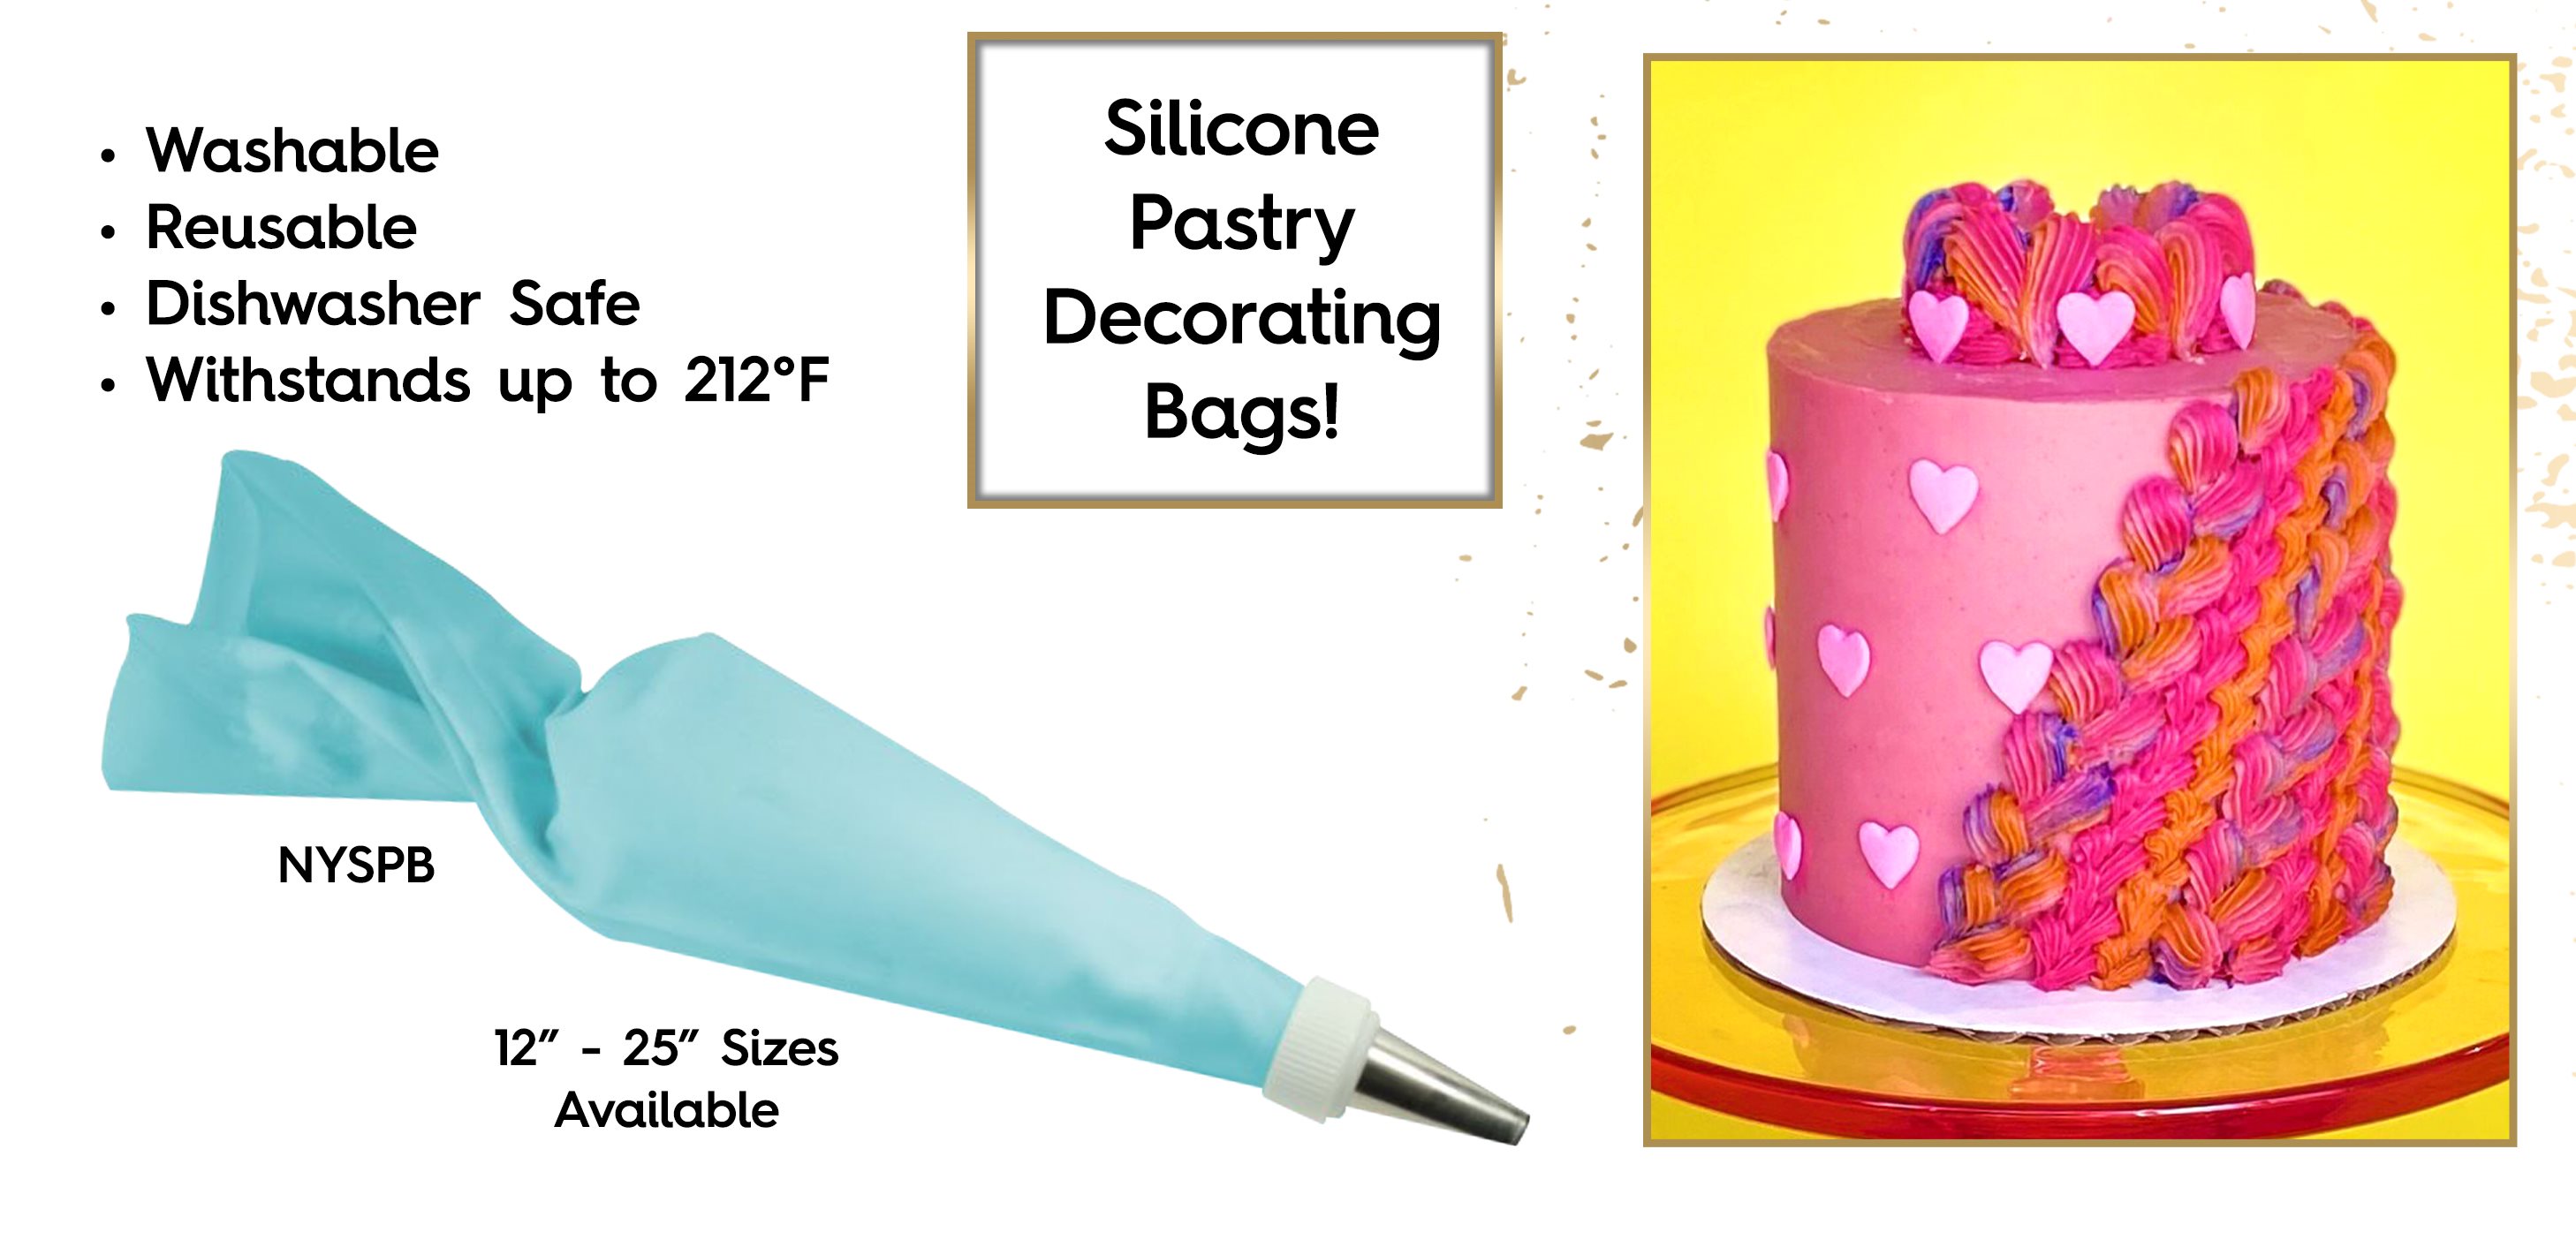 Silicone Pastry Piping Decorating Reusable Washable Bags